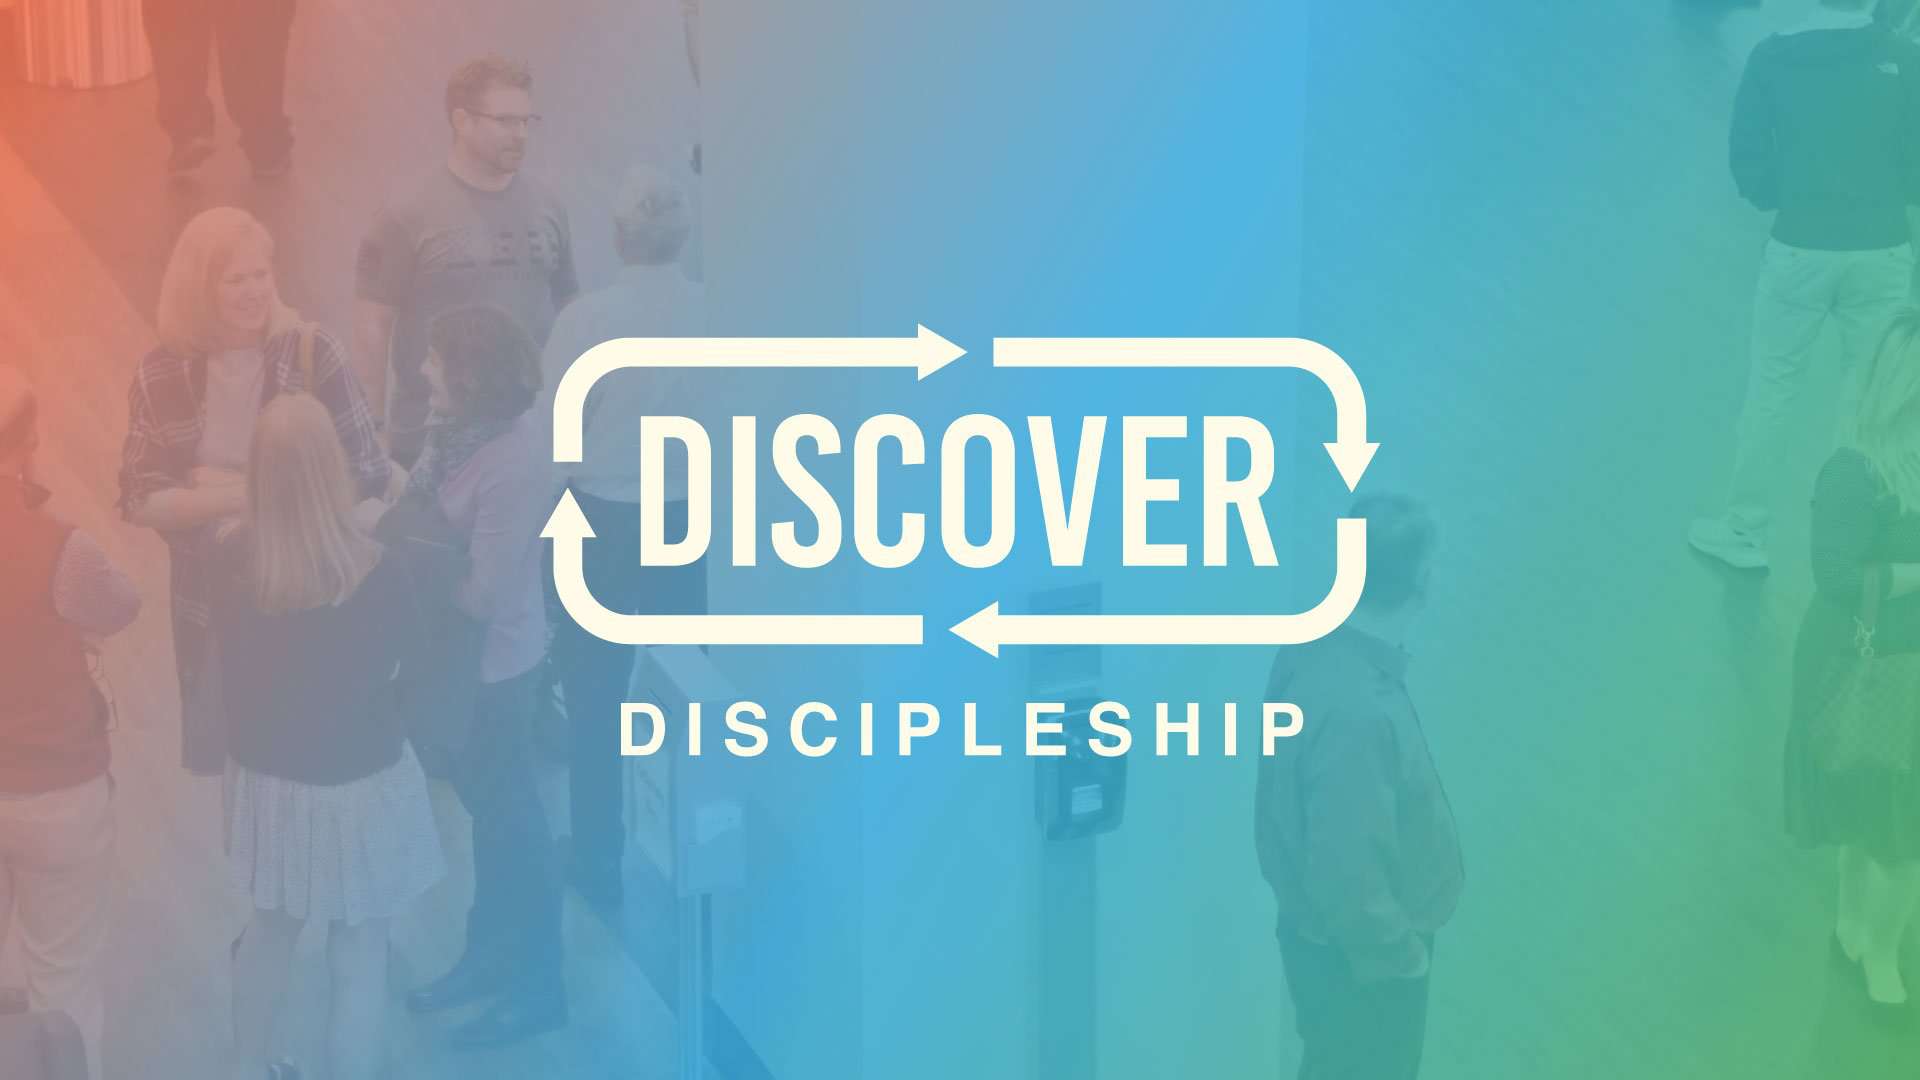 The Plan For Discipleship